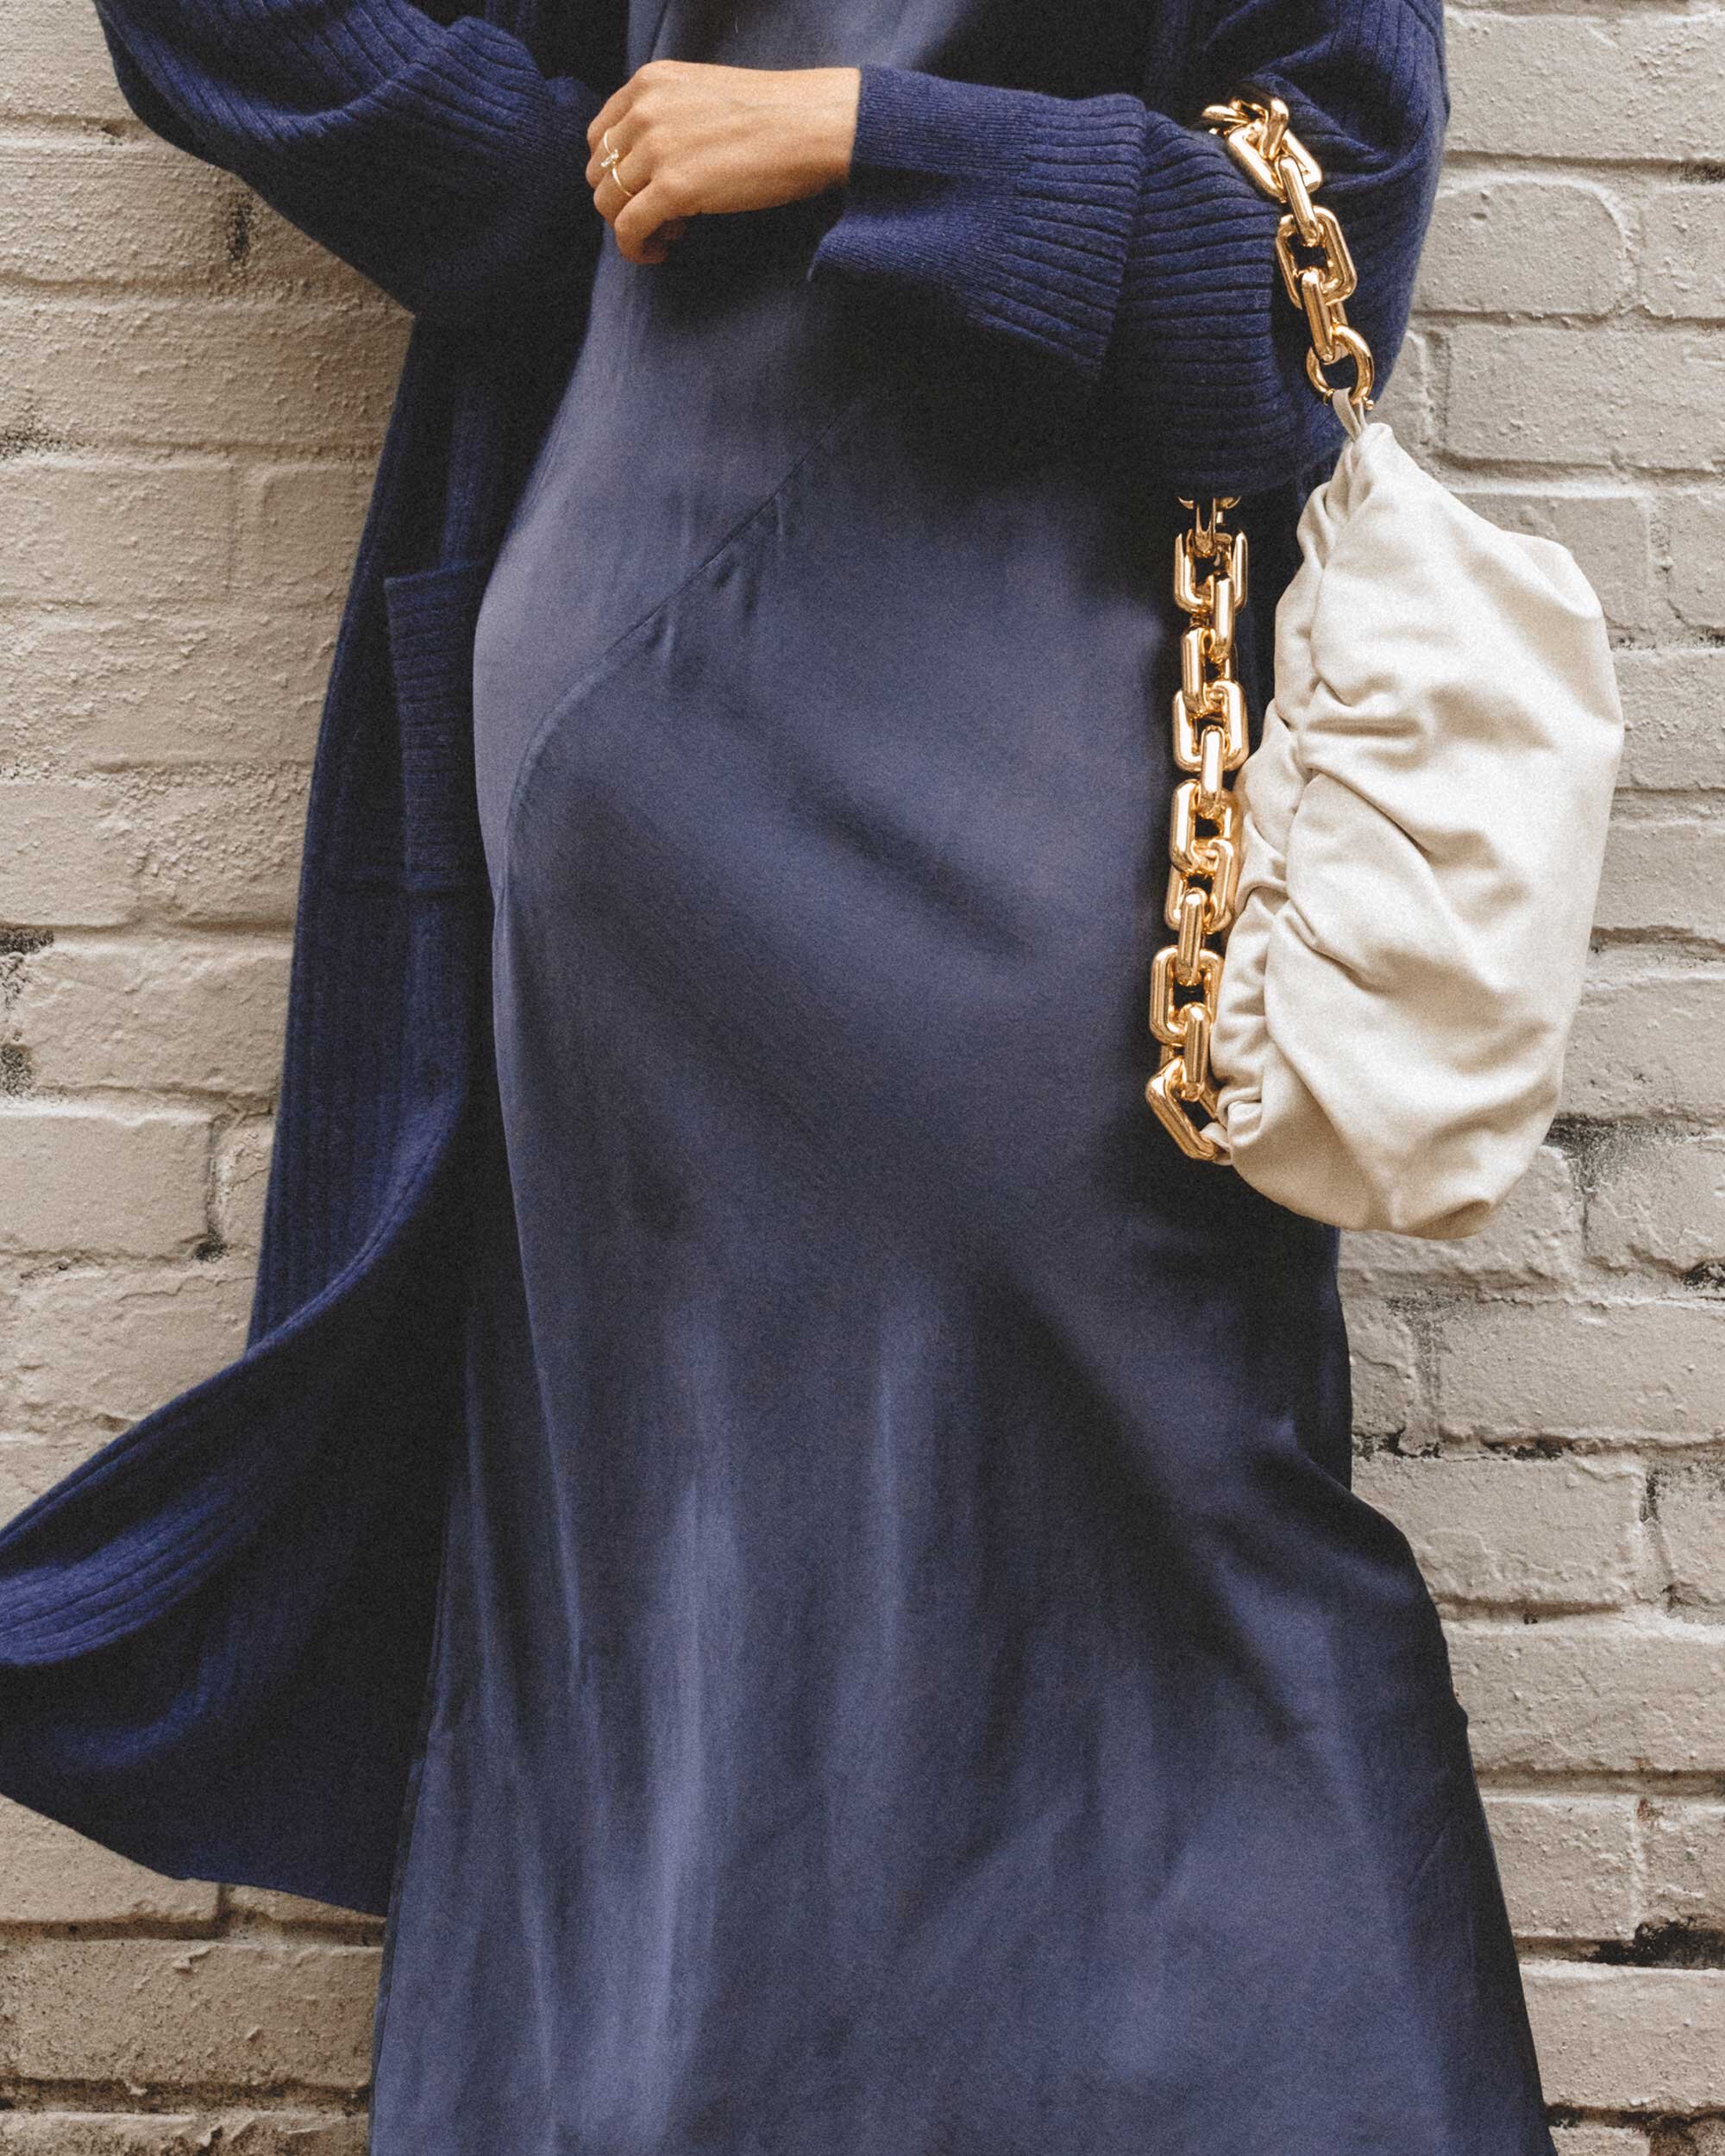 How to style a dress for winter. Sarah Butler of @sarahchristine wearing Line and Dot navy silk satin dress, Sablyn Long Cashmere Sweater, and Bottega Veneta The Chain Pouch Leather Clutch in Seattle, Washington -2.jpg